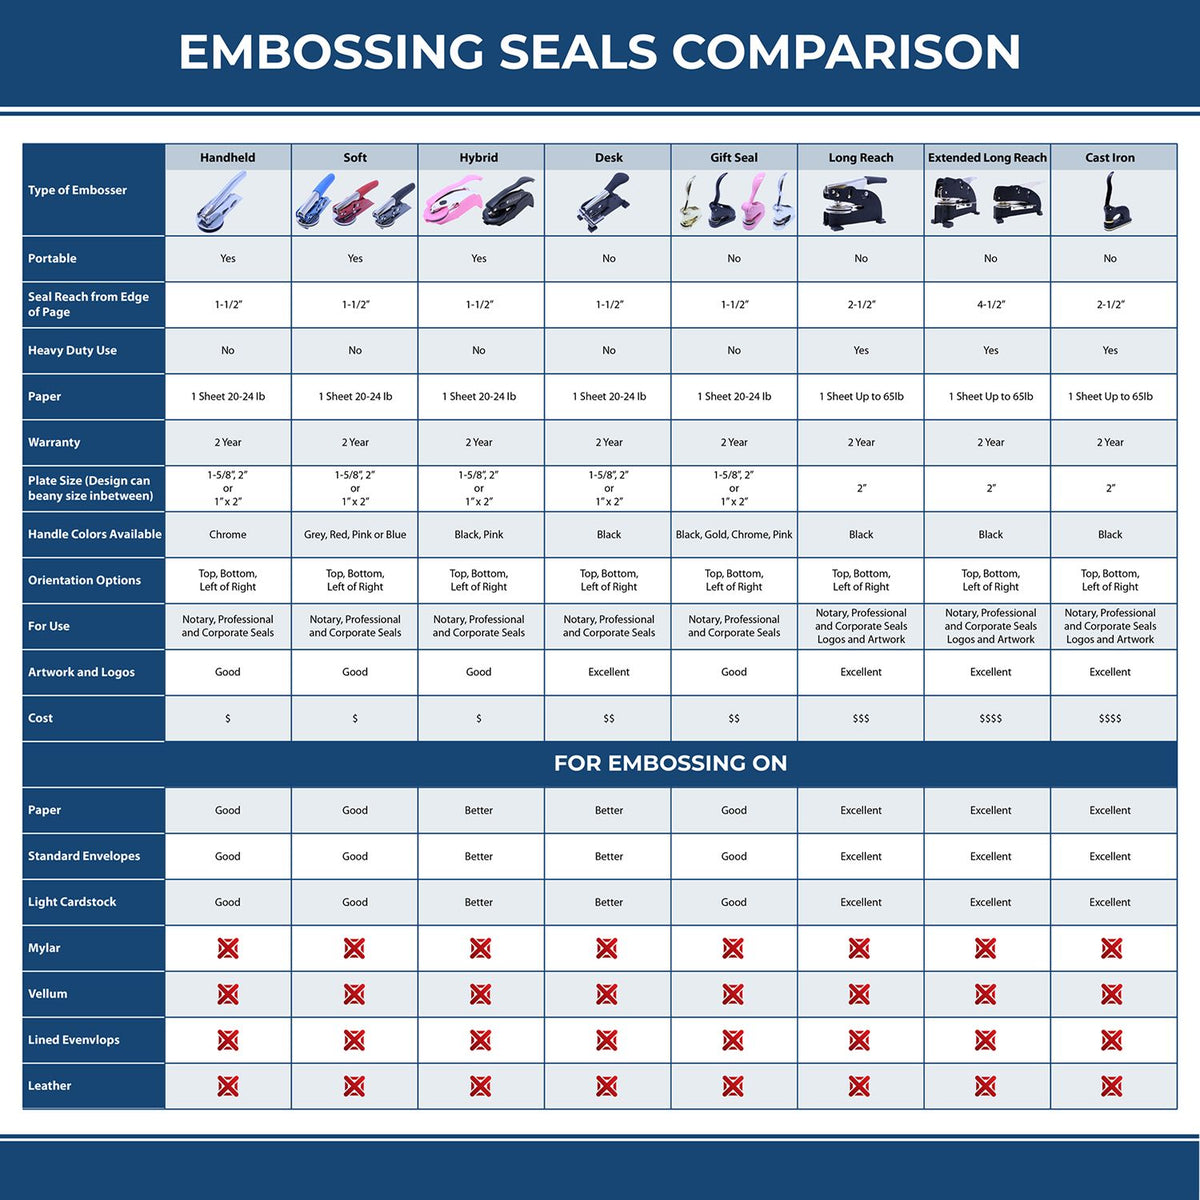 A comparison chart for the different types of mount models available for the Soft Oregon Professional Geologist Seal